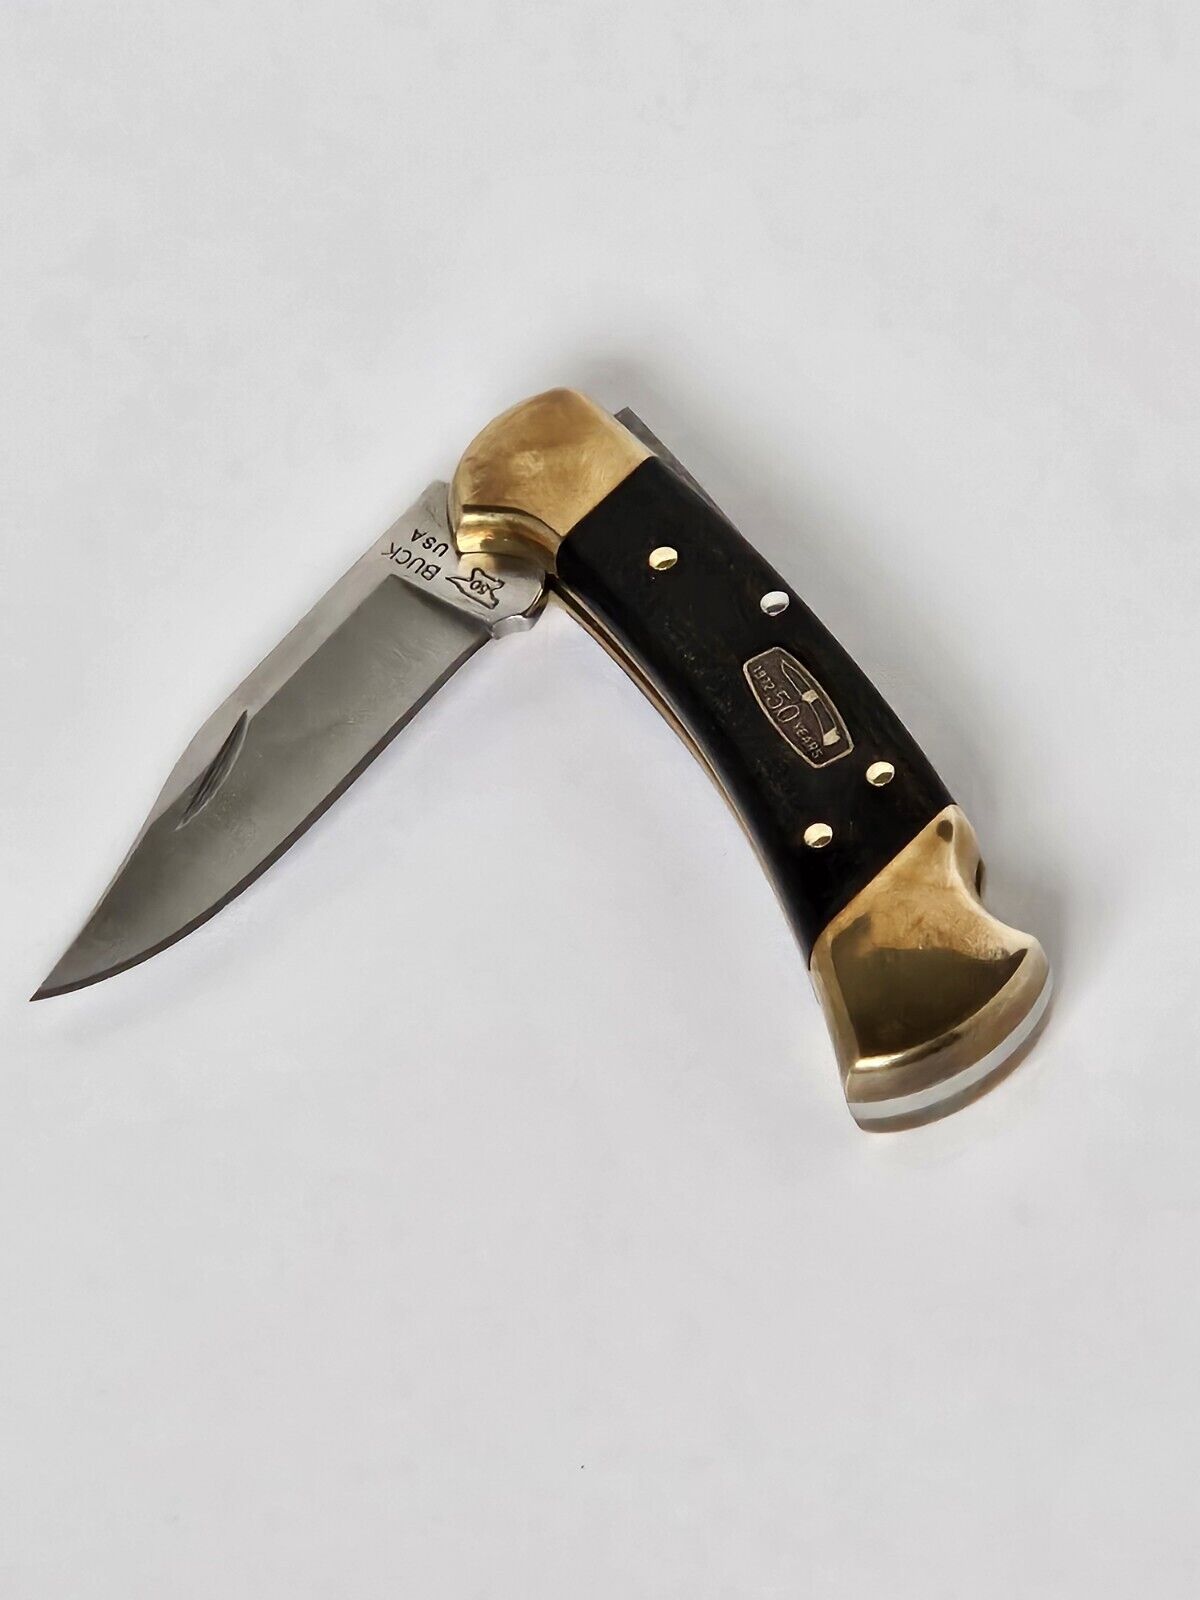 Rare 50 Year Special Edition Ranger 112 Buck Knife